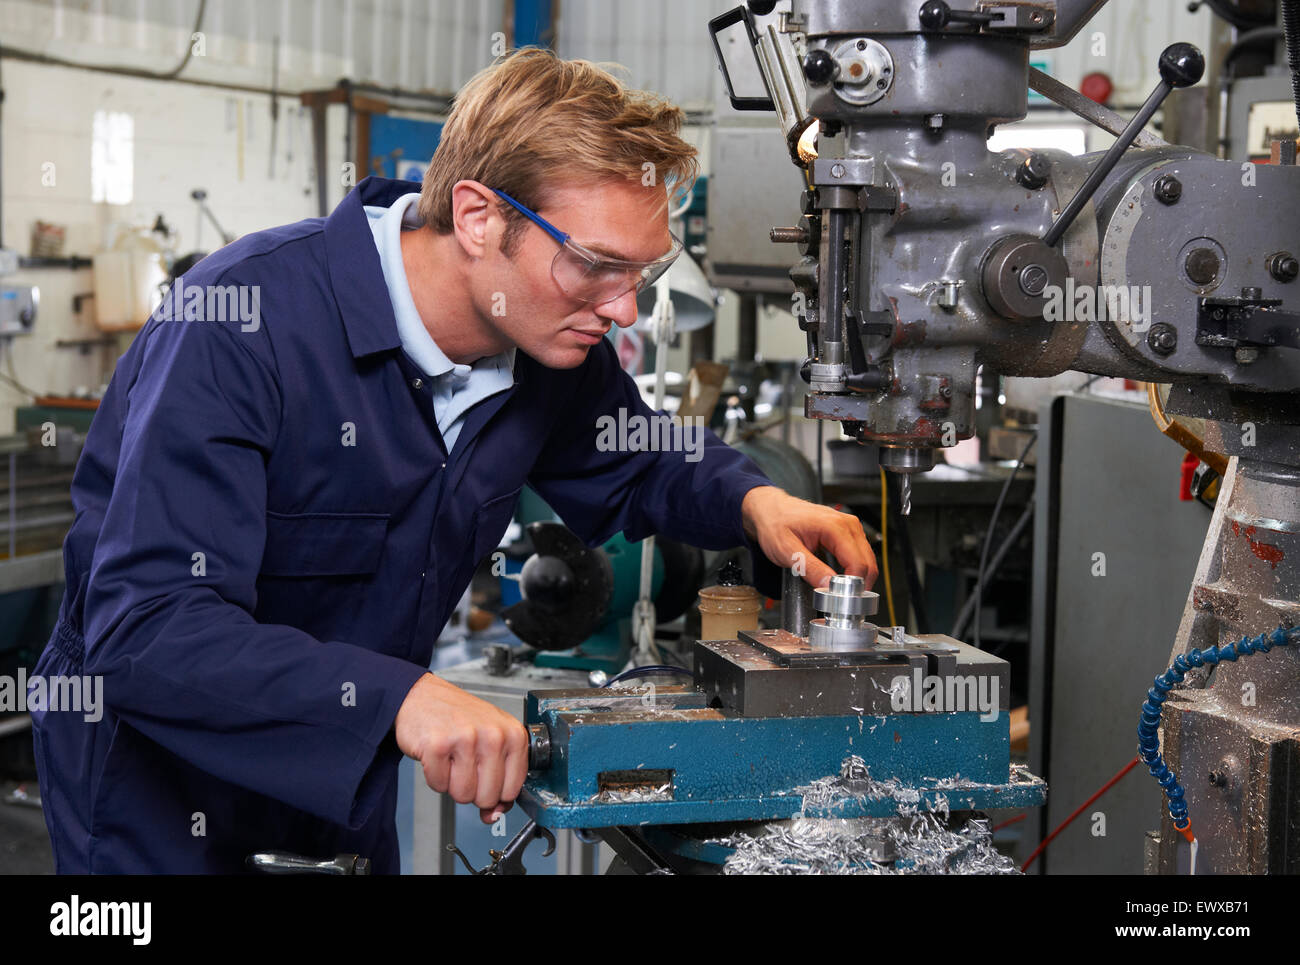 Engineer Using Drill In Factory Stock Photo